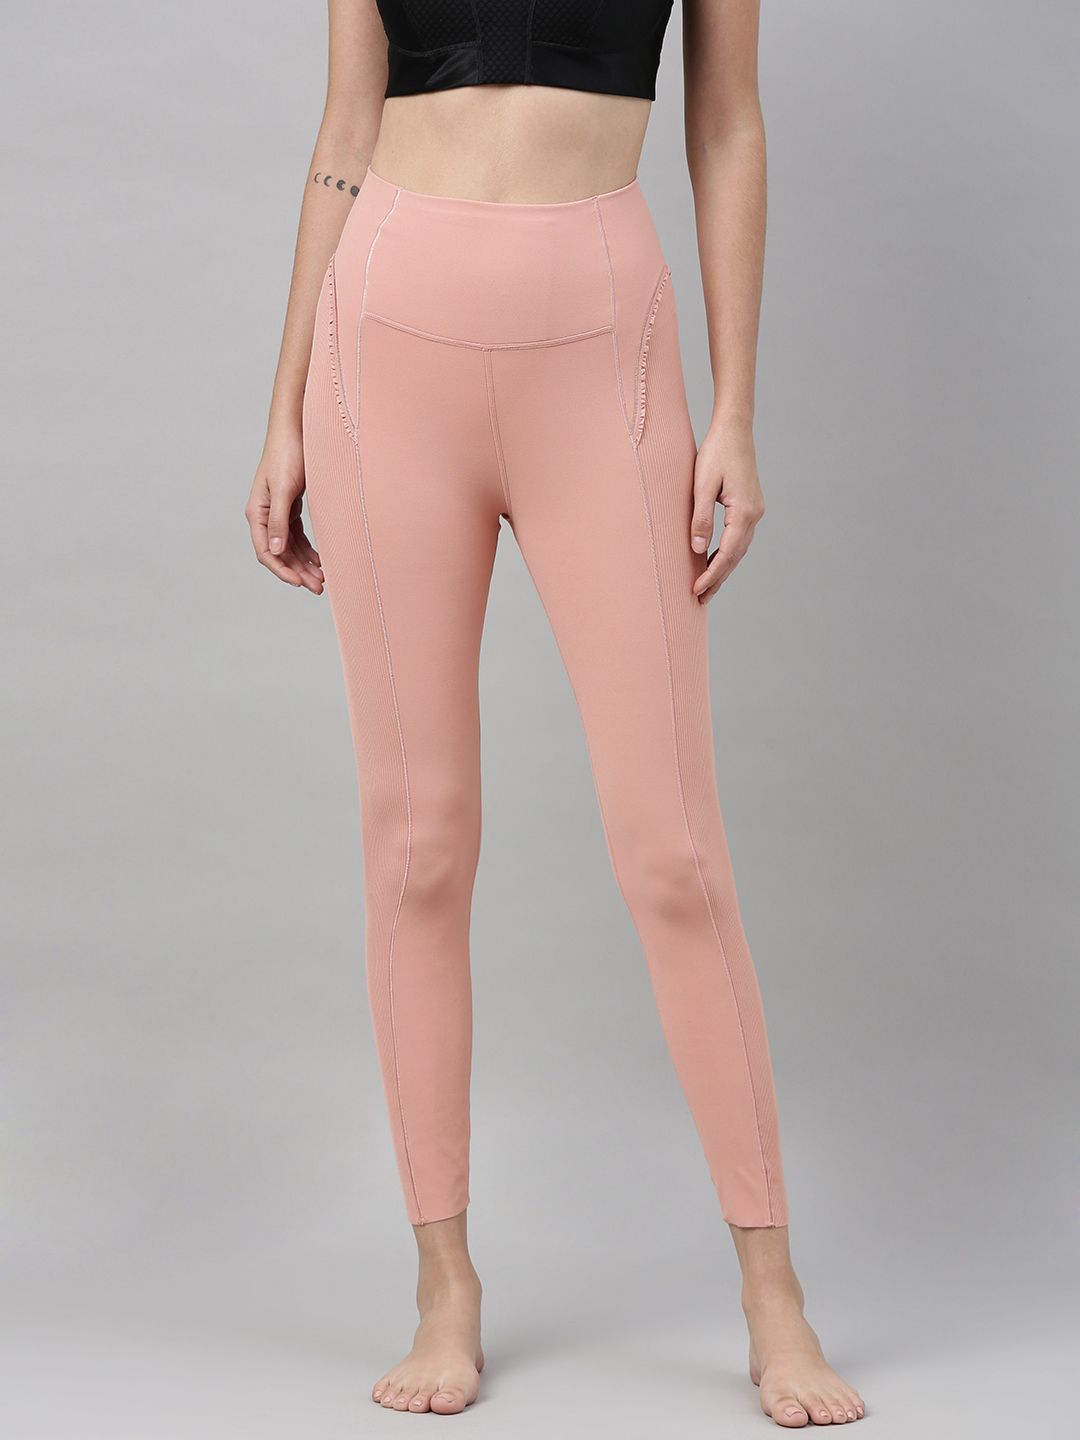 Nike Women's Pink Solid 7/8 Tights Price in India